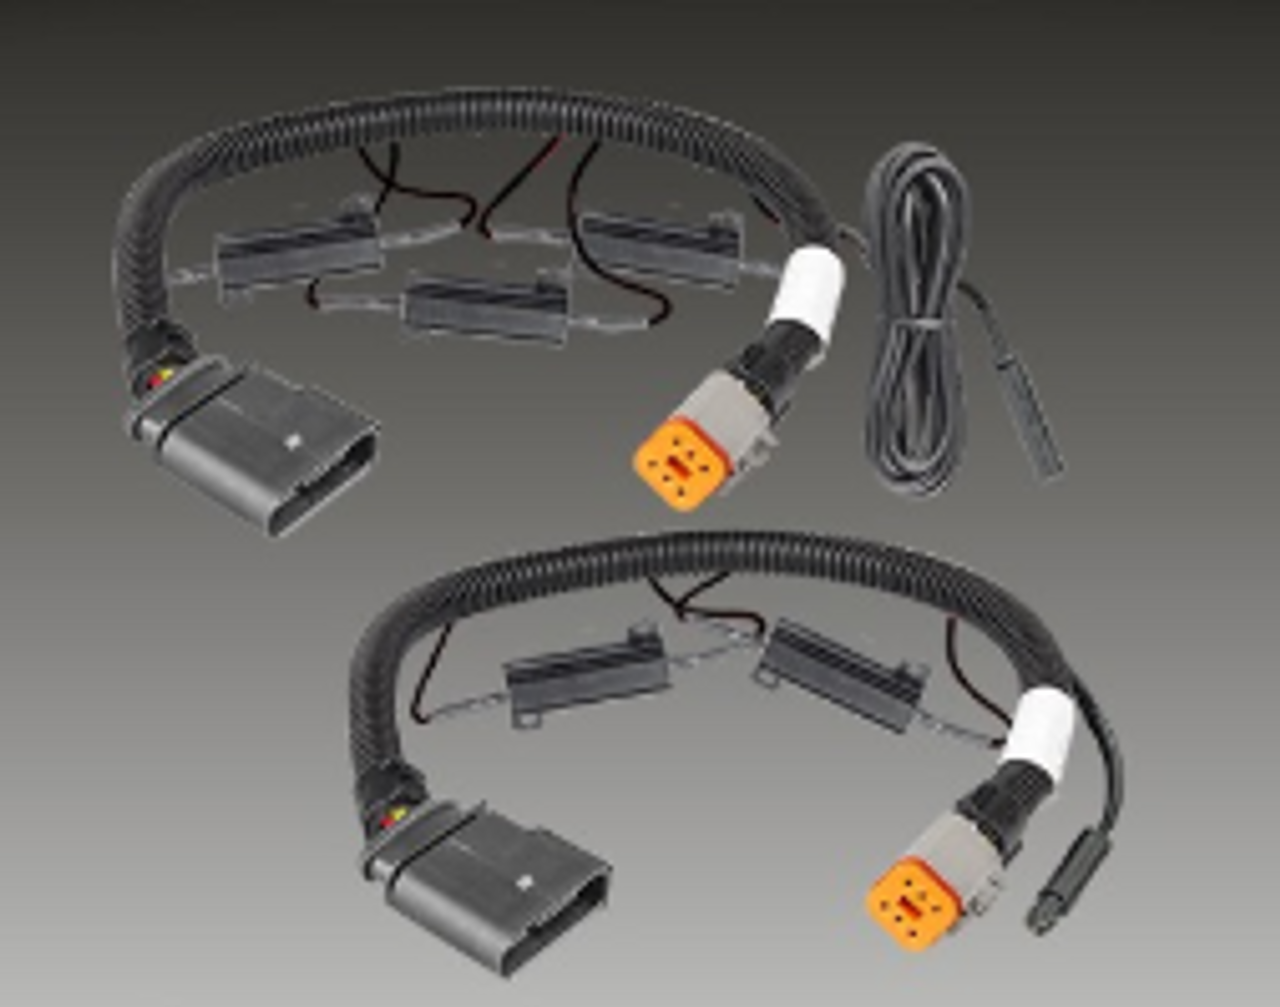 SOMAXI2LR/450B+PATCH-AMAROK5LR - Amarok LED Patch Cable System. Plug and Play. LED Upgrade. Designed for Trays. MAXI2LR Series Light. Stop, Tail, Indicator and Reverse. 12v Only. Lamp with Conversion Cable. Application to Suit Volkswagen Amarok. Autolamp. Ultimate LED. 